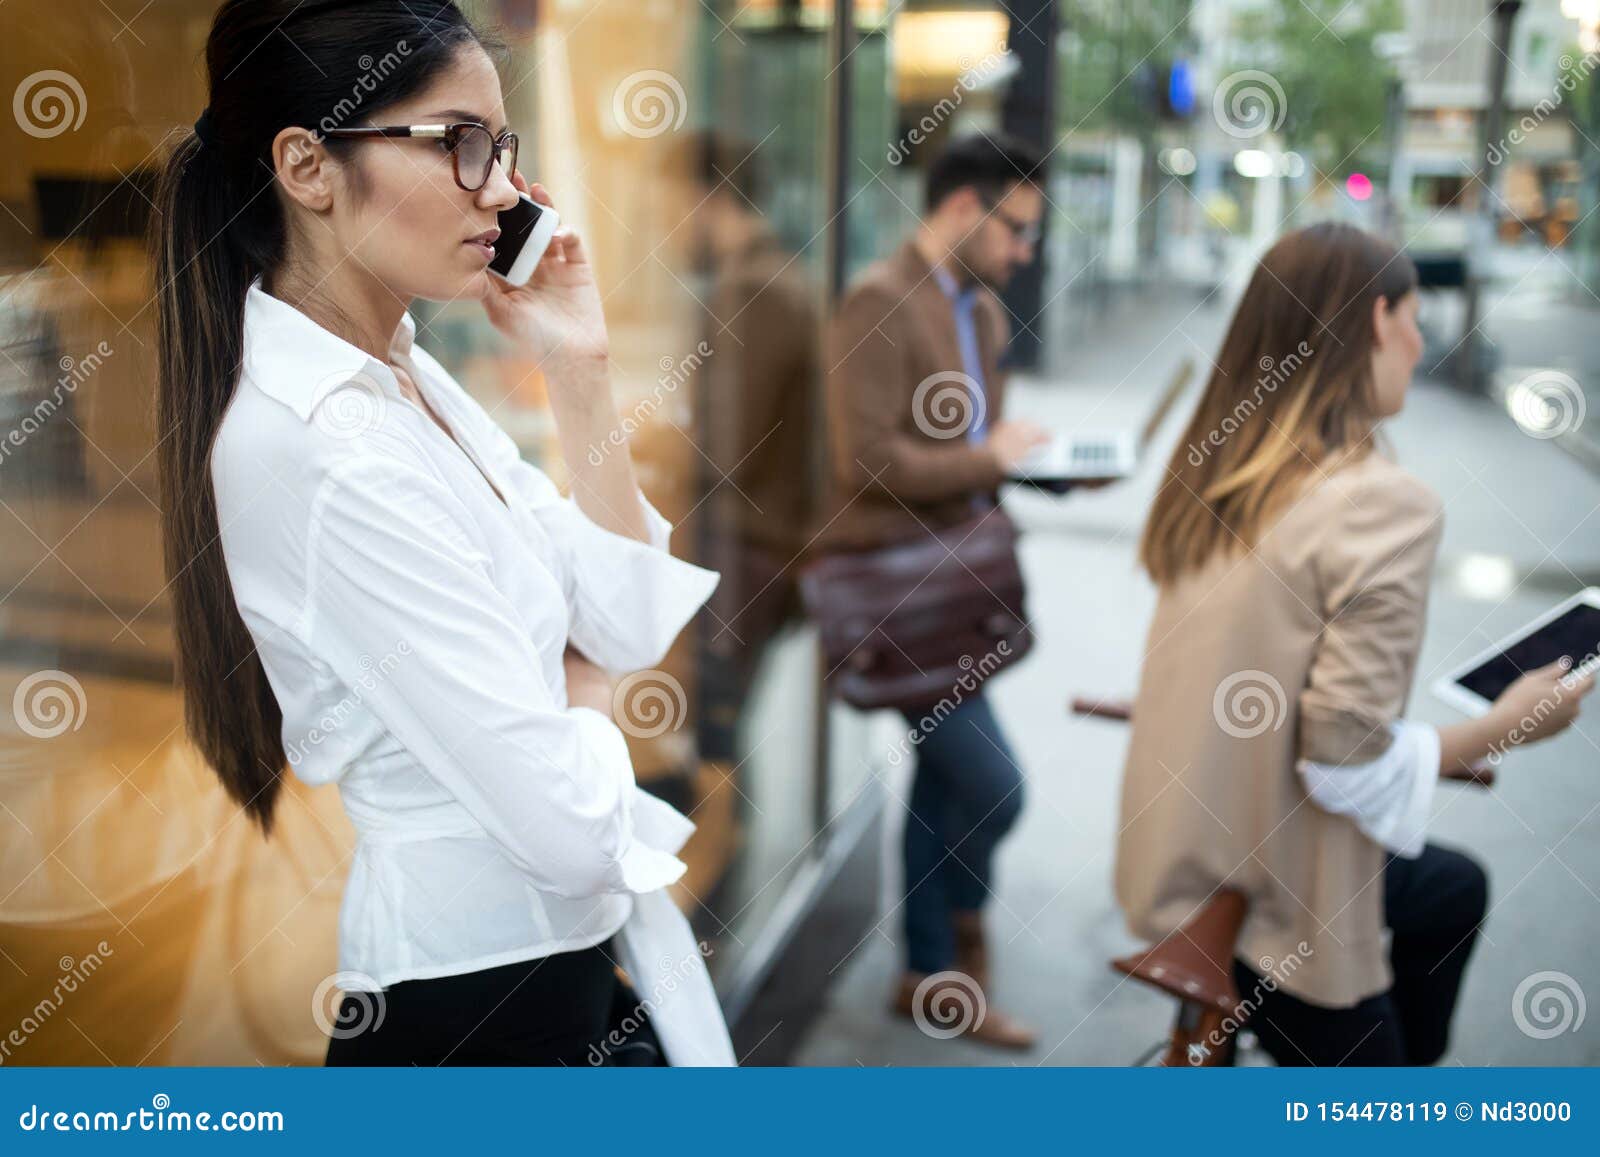 Business Team Digital Device Technology Connecting Concept Stock Image ...